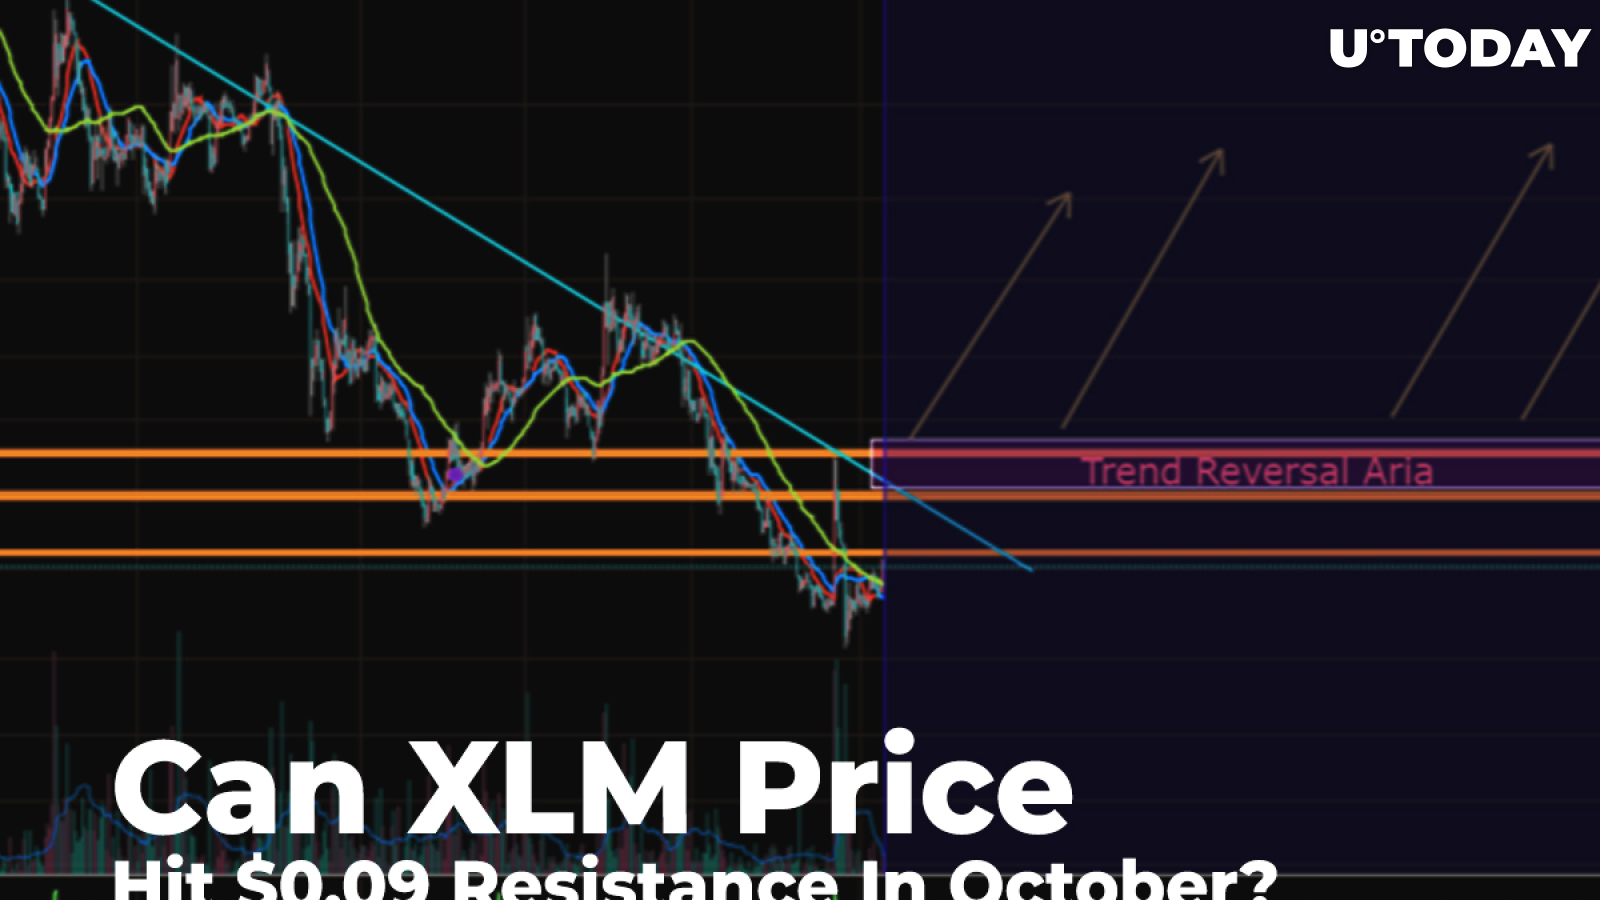 Can XLM Price Hit $0.09 Resistance In October? Traders Explain The Current Trends